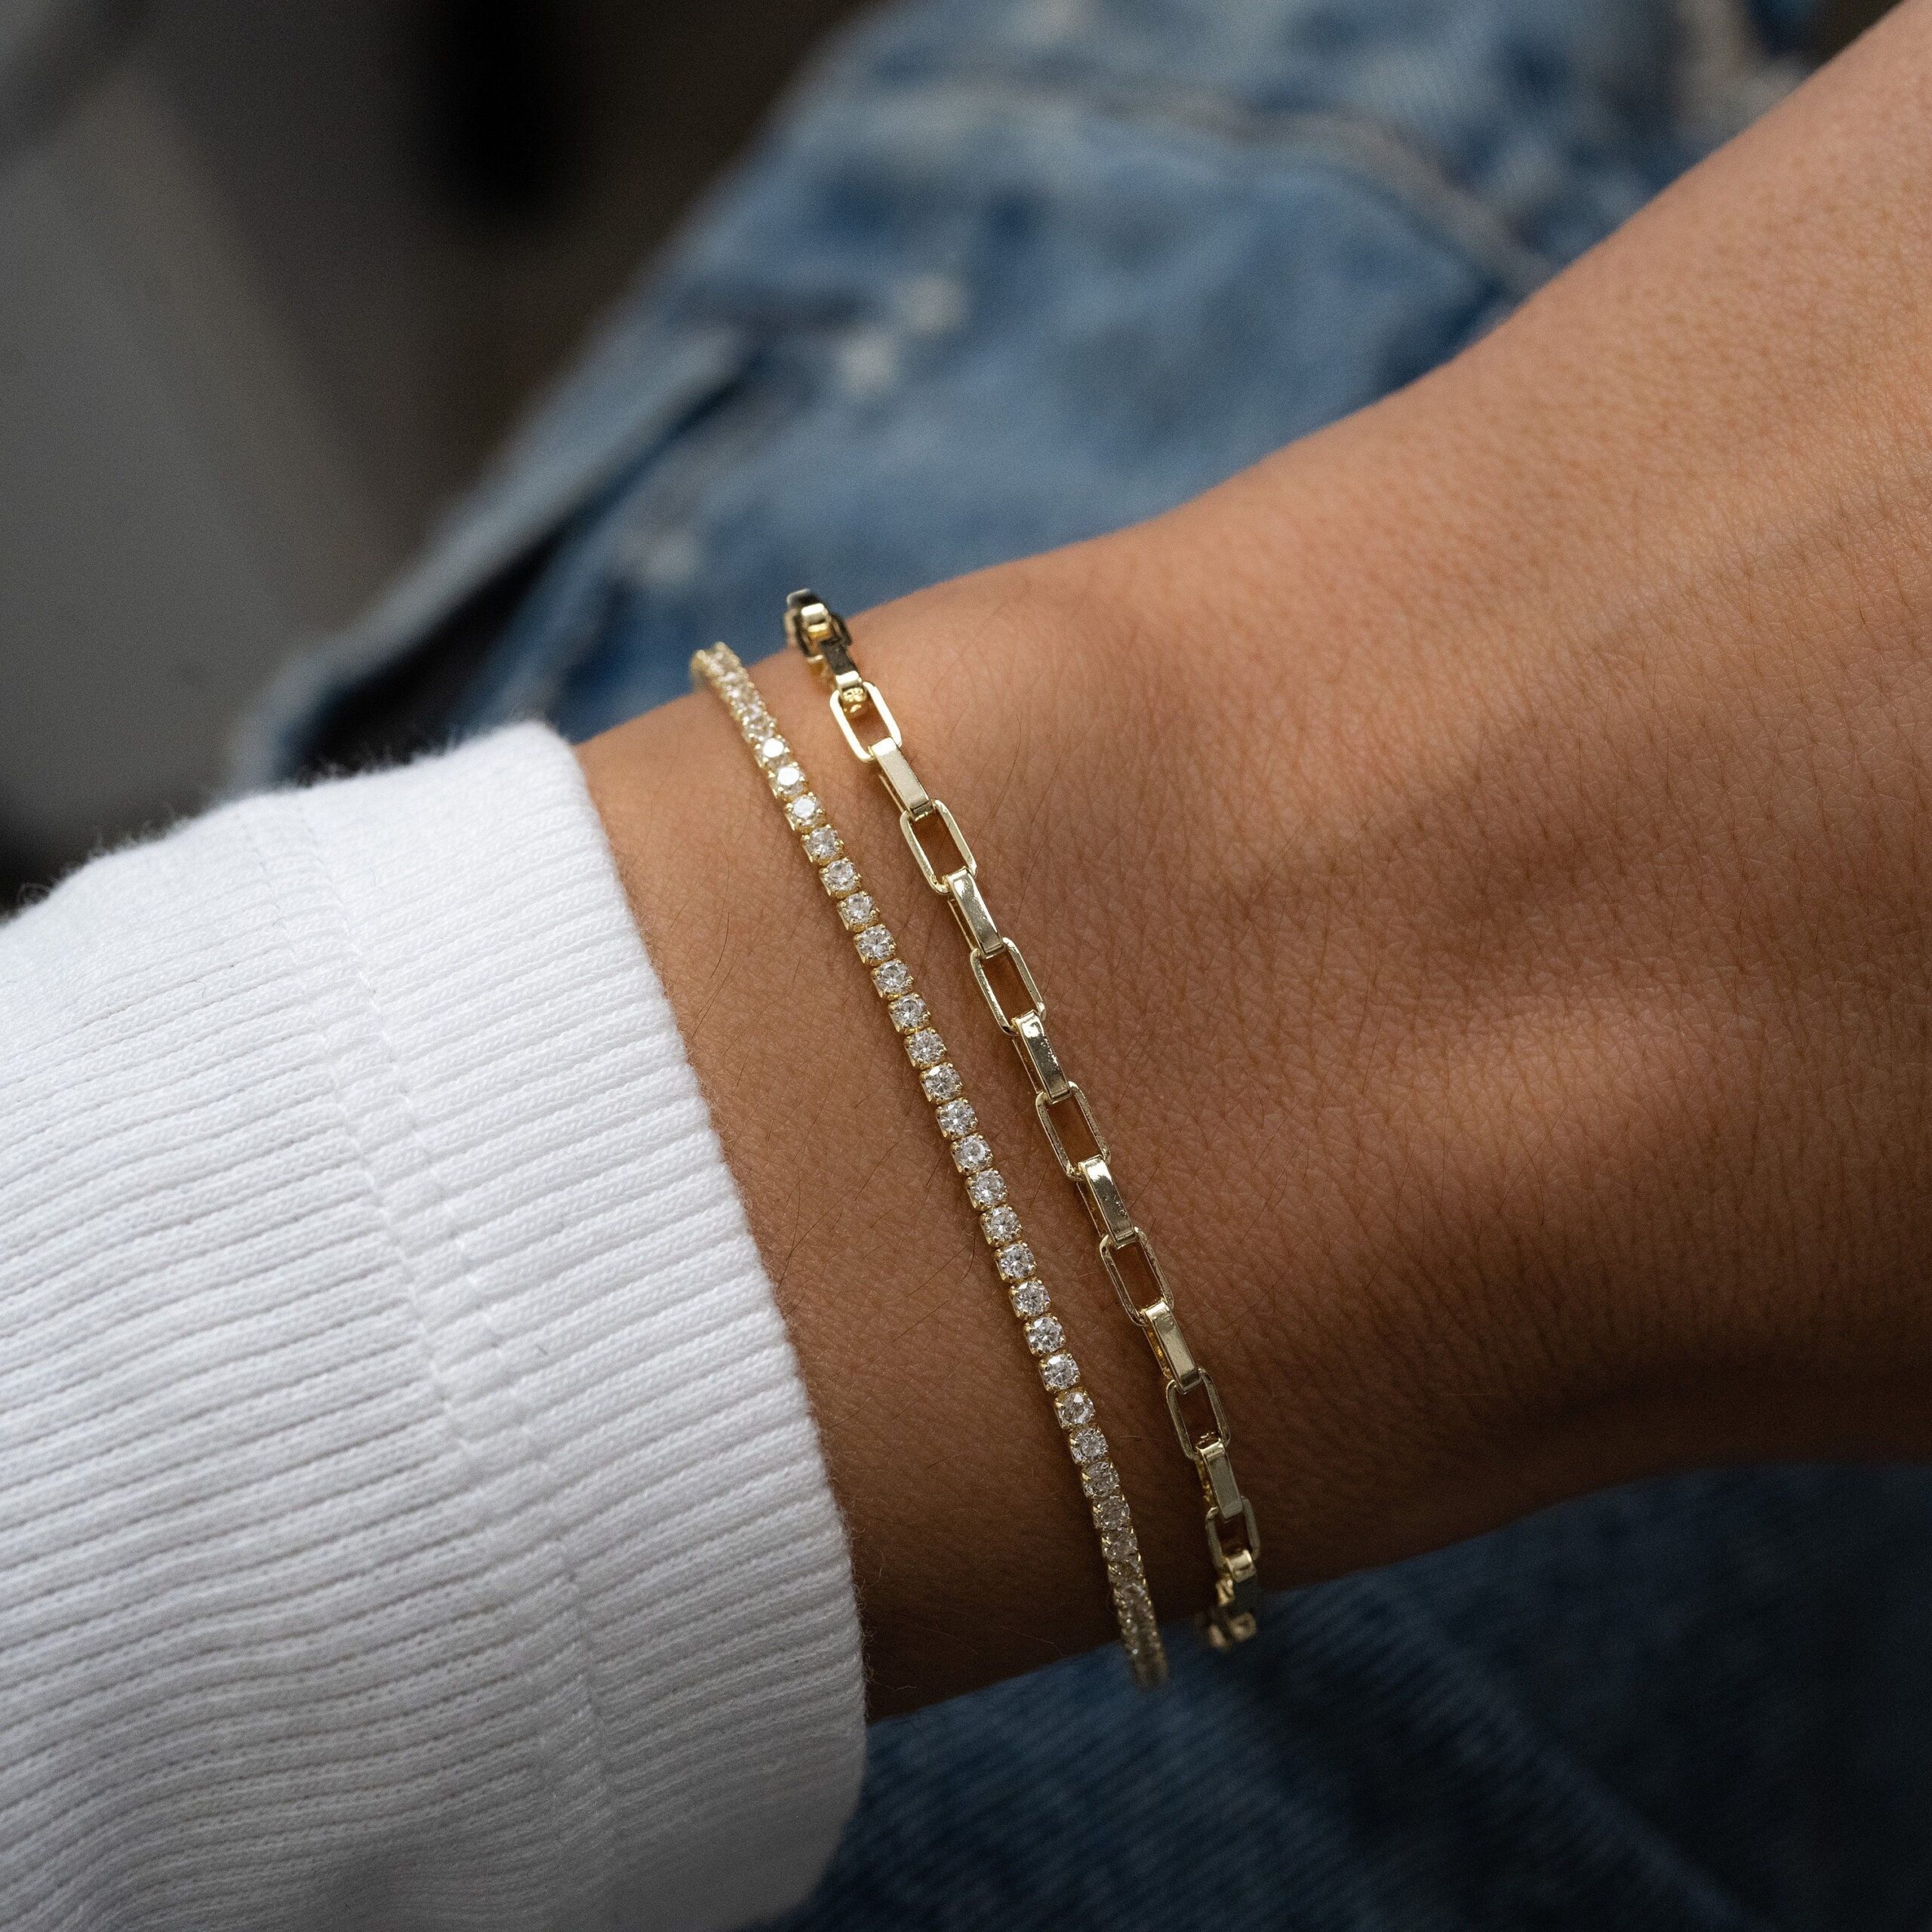 The Ultimate Guide to Women’s Bracelets:
How to Choose, Style, and Care for Them